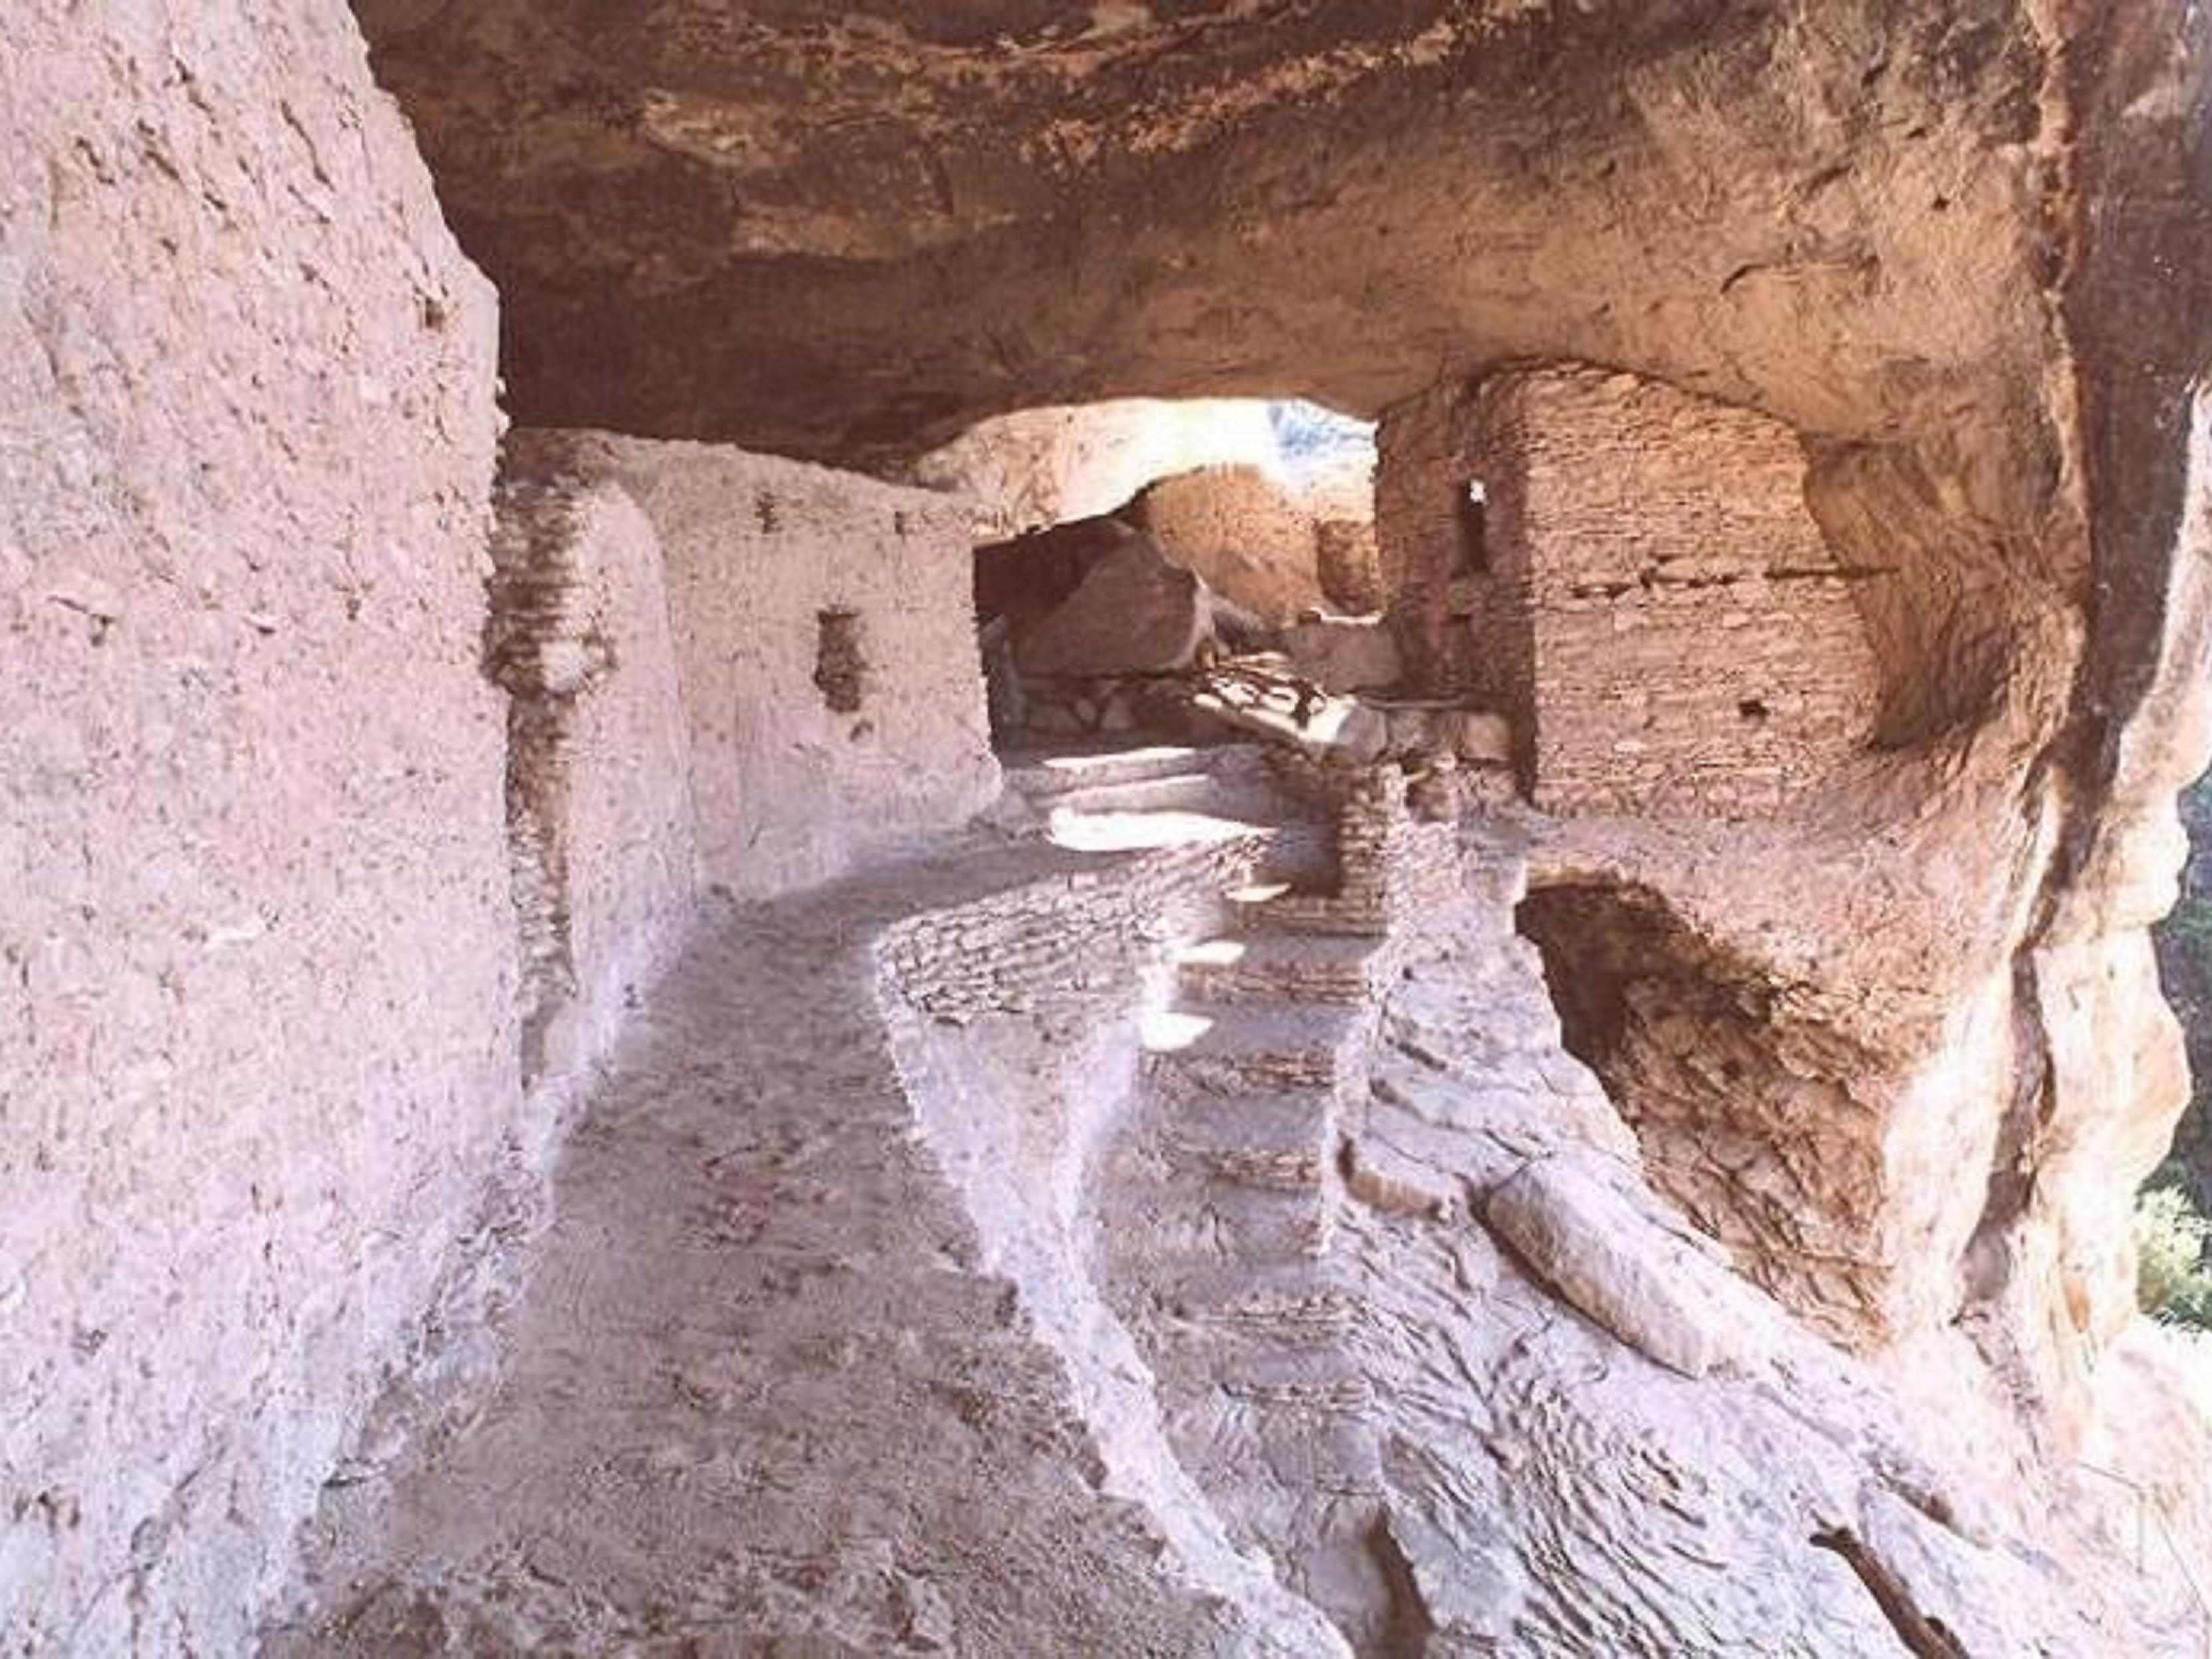 Stay at Silver City hotel when visiting the Gila Cliff Dwellings